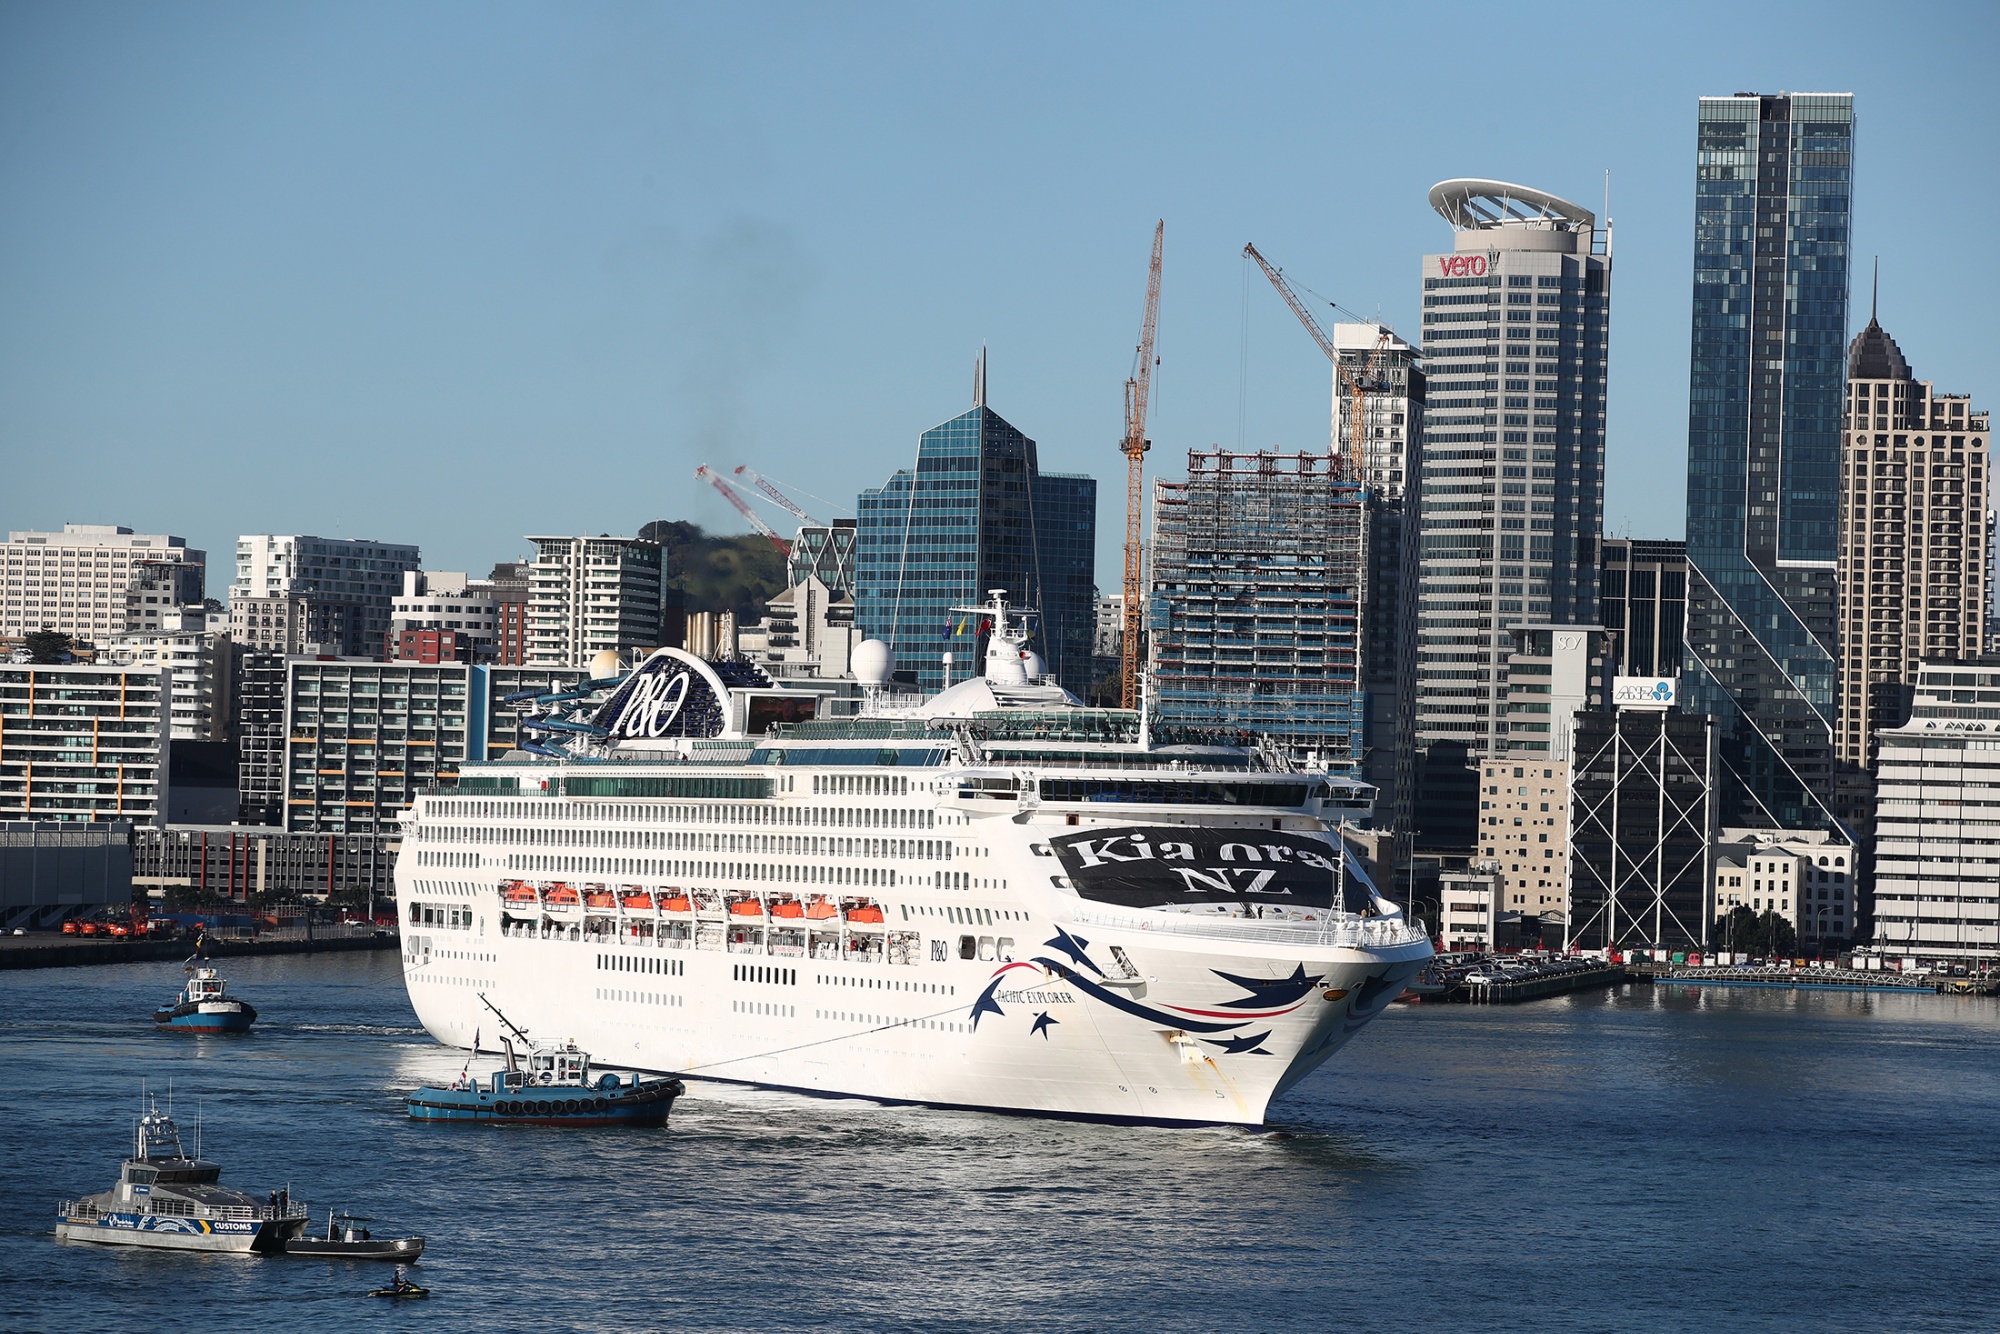 New Zealand Back First Cruise Ship Since COVID Hit Bloomberg